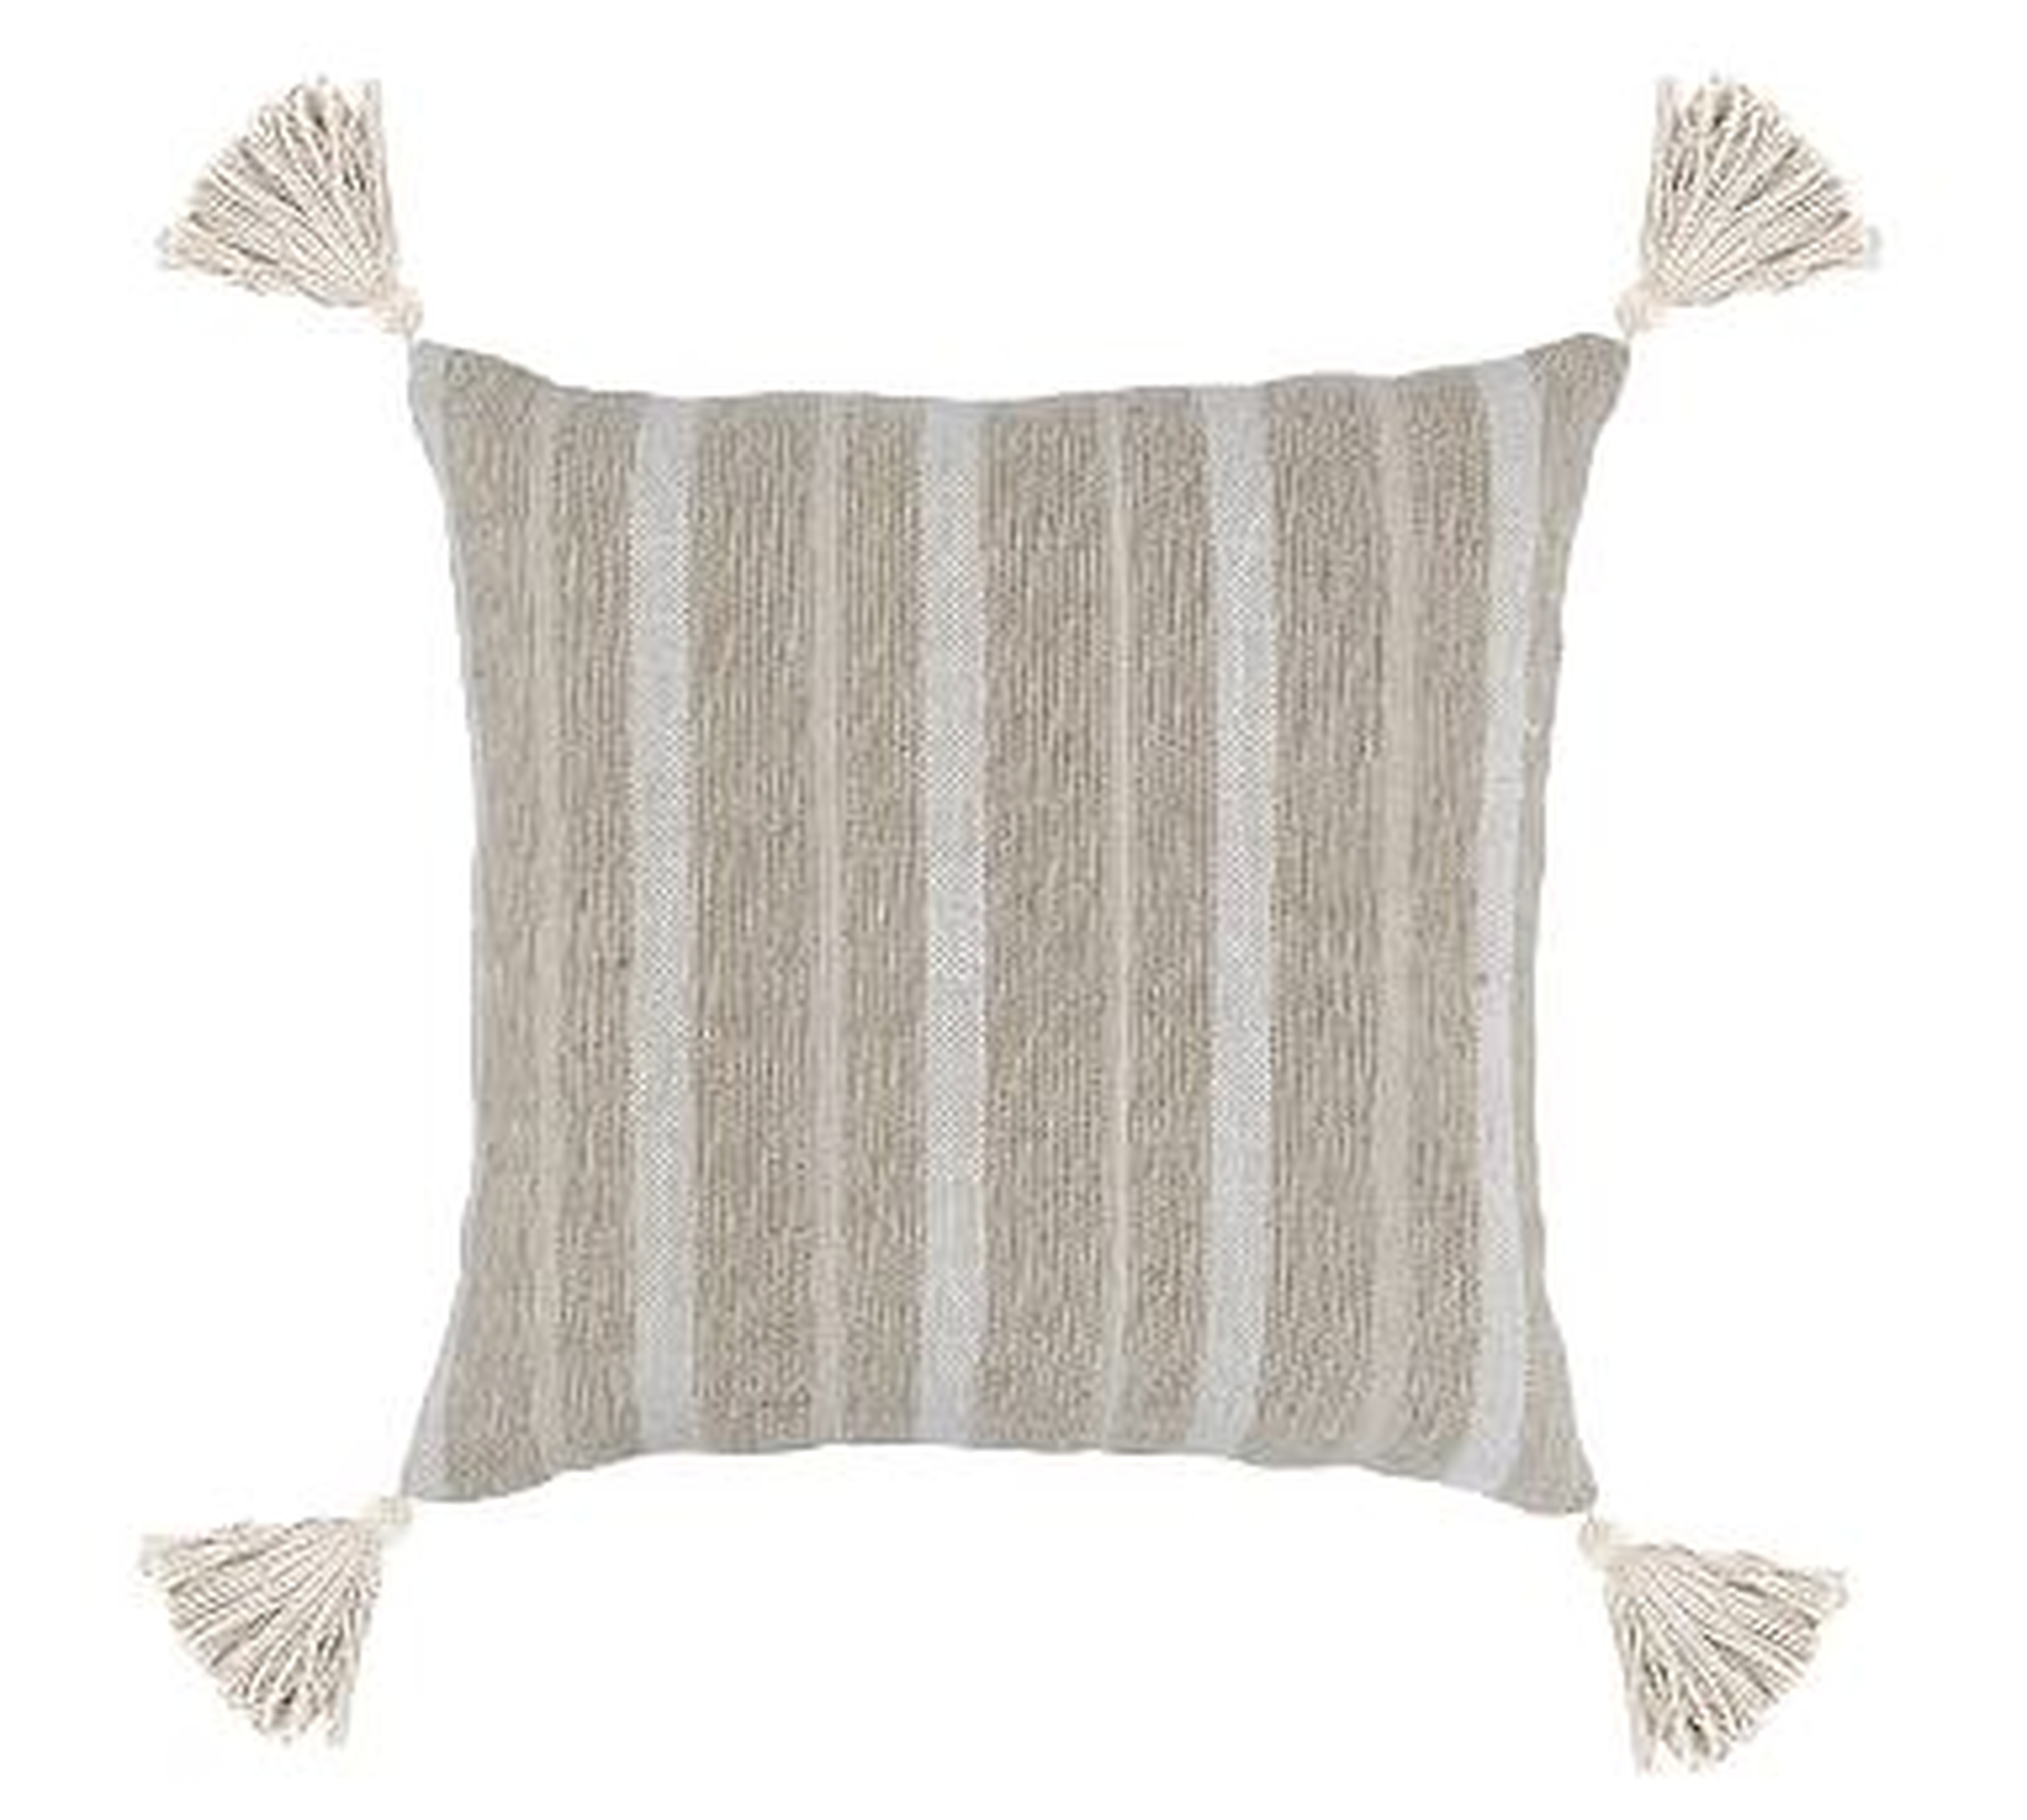 Cash Pillow Cover, 22" x 22", Natural - Pottery Barn